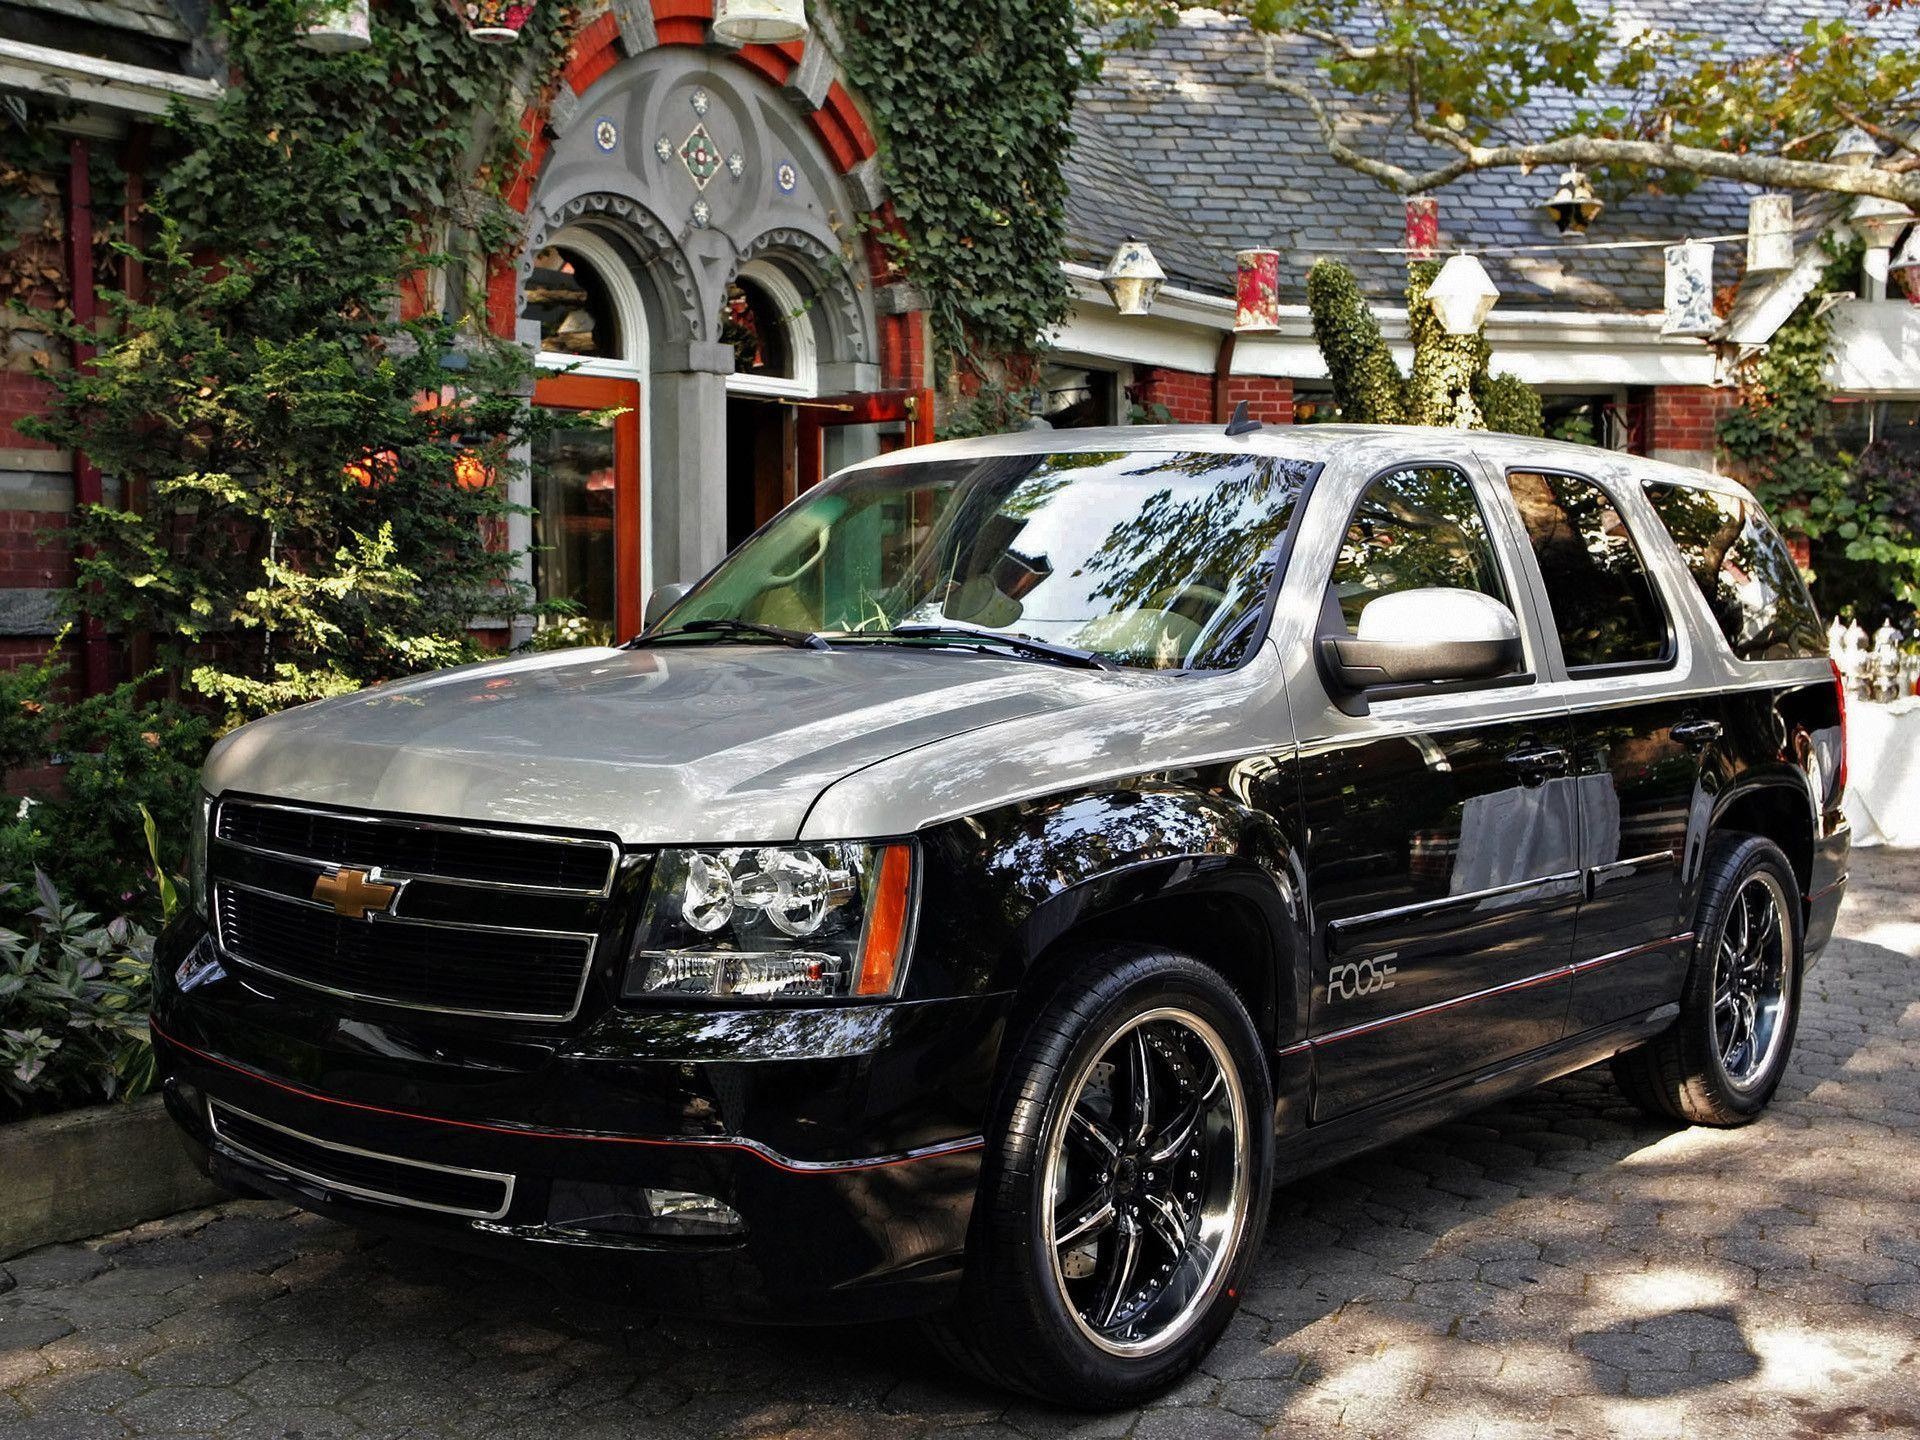 Hd Chevrolet Tahoe Concept 2007 By Chip Foose Wallpaper Download 1920x1440